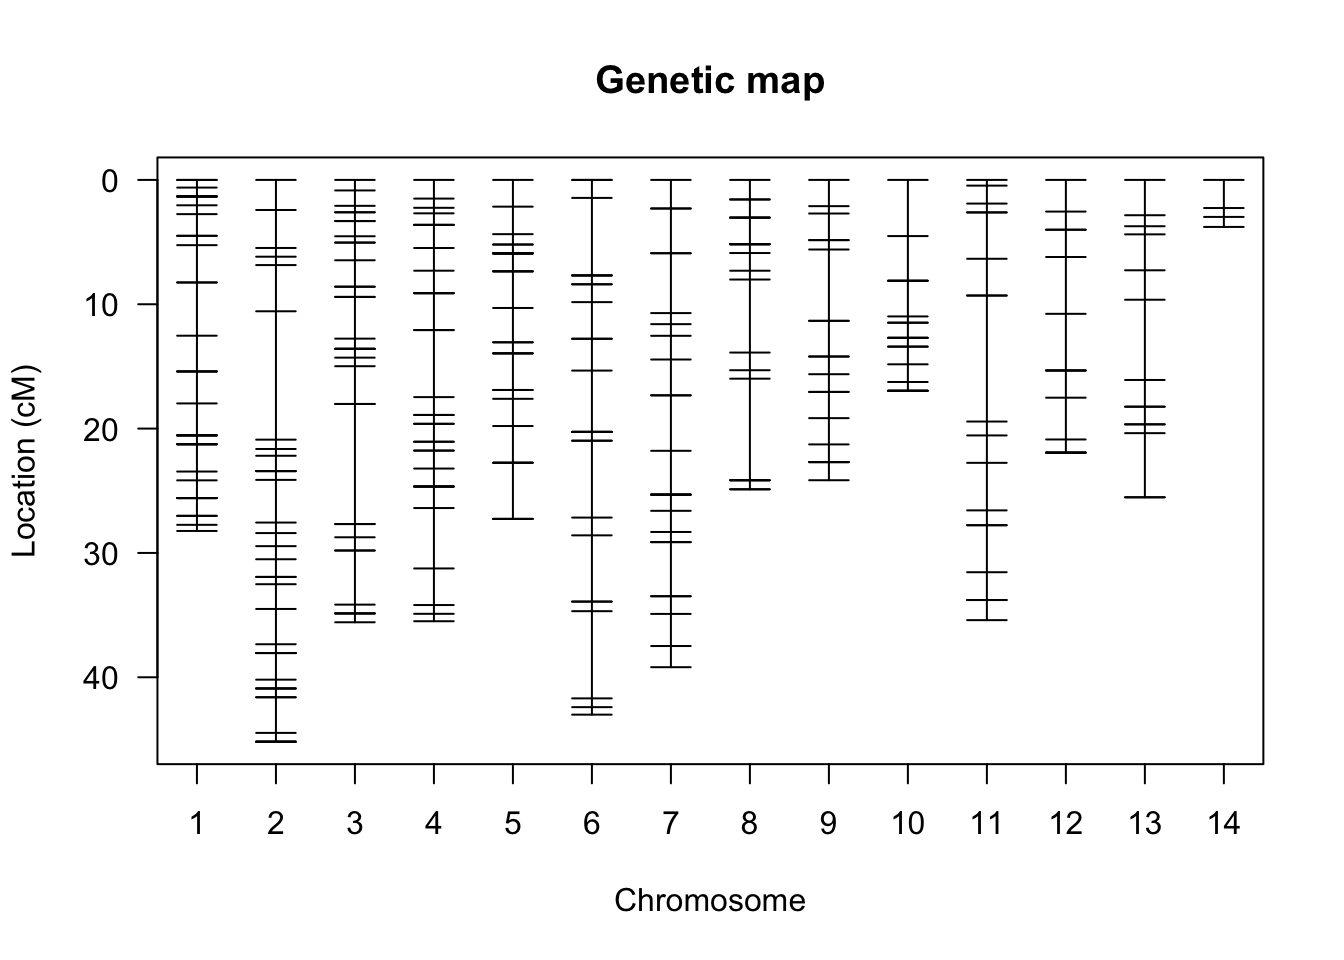 Genetic map of markers included in the `bedbug` data frame. Different chomosomes are aligned along the x-axis, and the relative positions of markers on each chromosome are indicated with horizontal dashes along the y-axis.